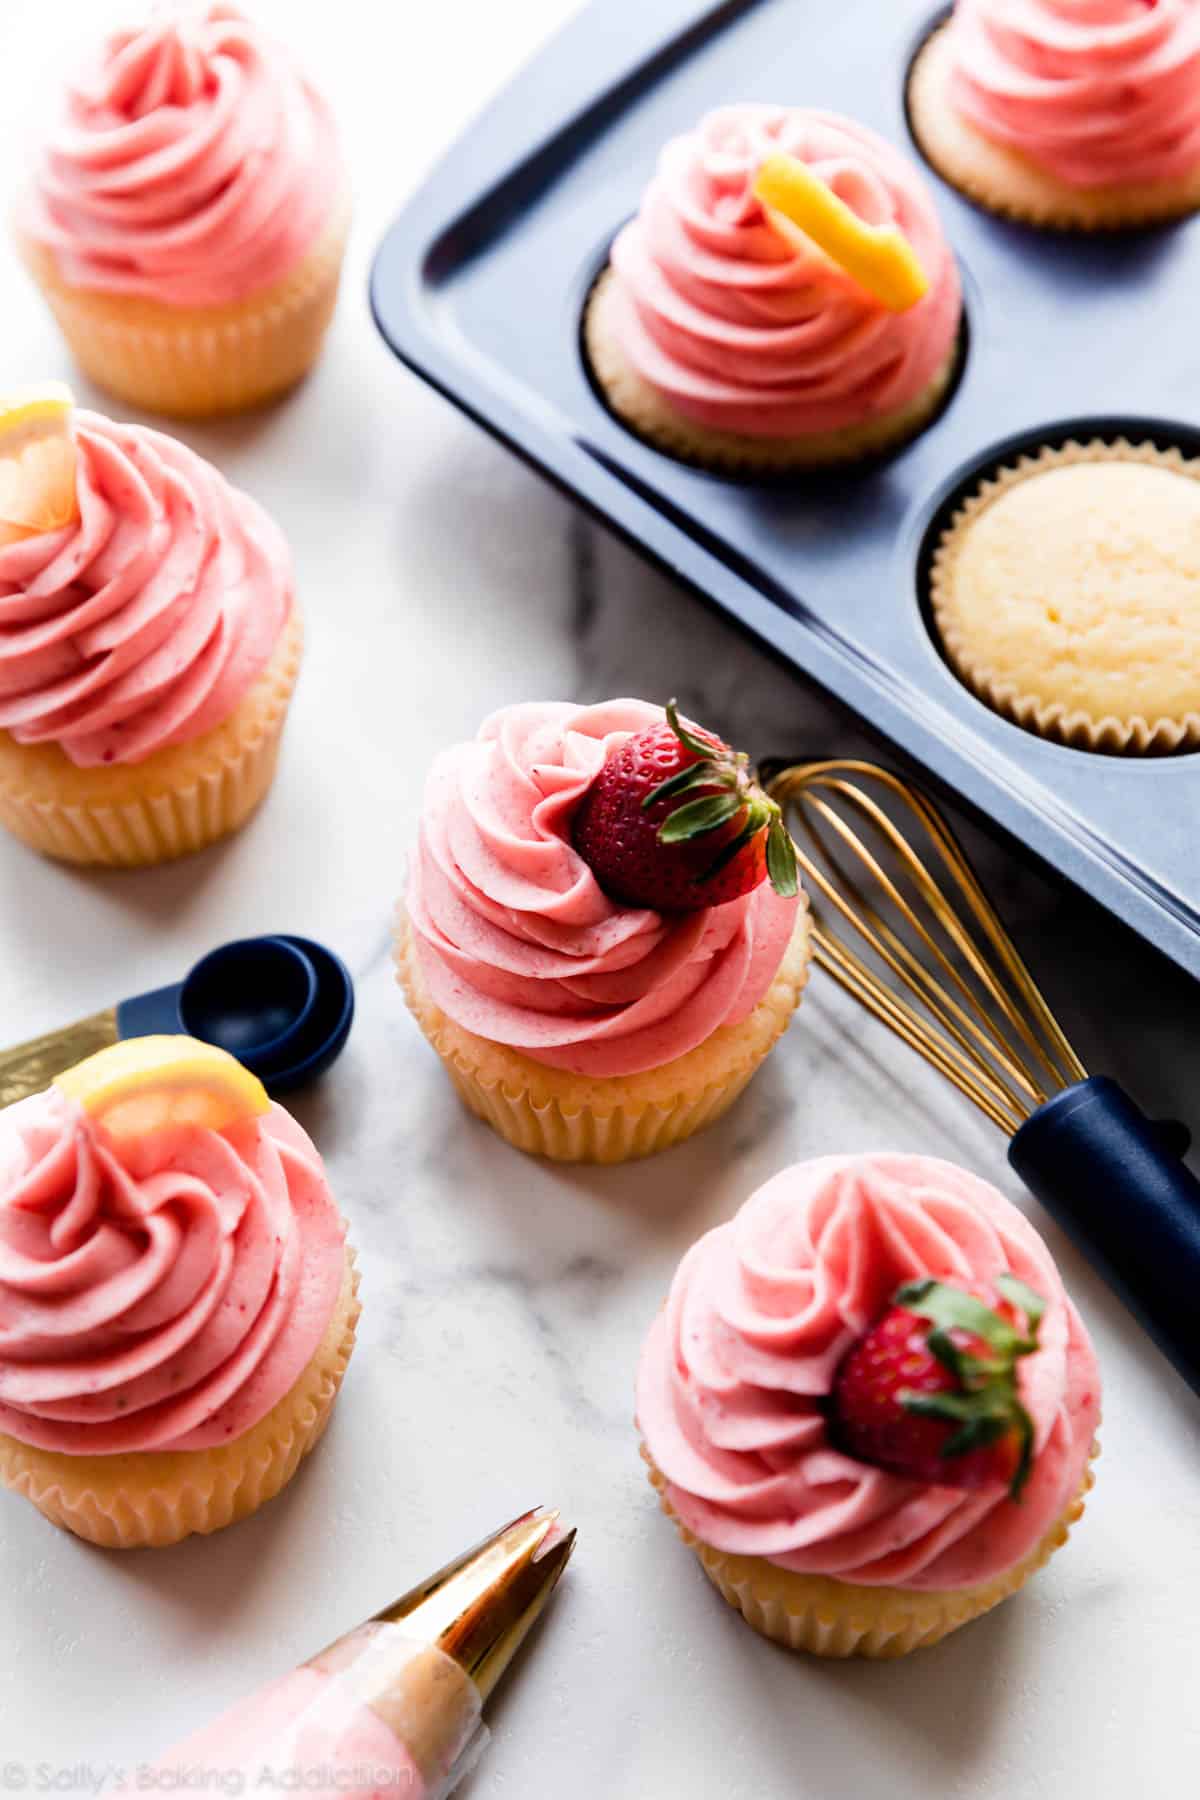 strawberry lemon cupcakes with strawberries and lemons used as garnish